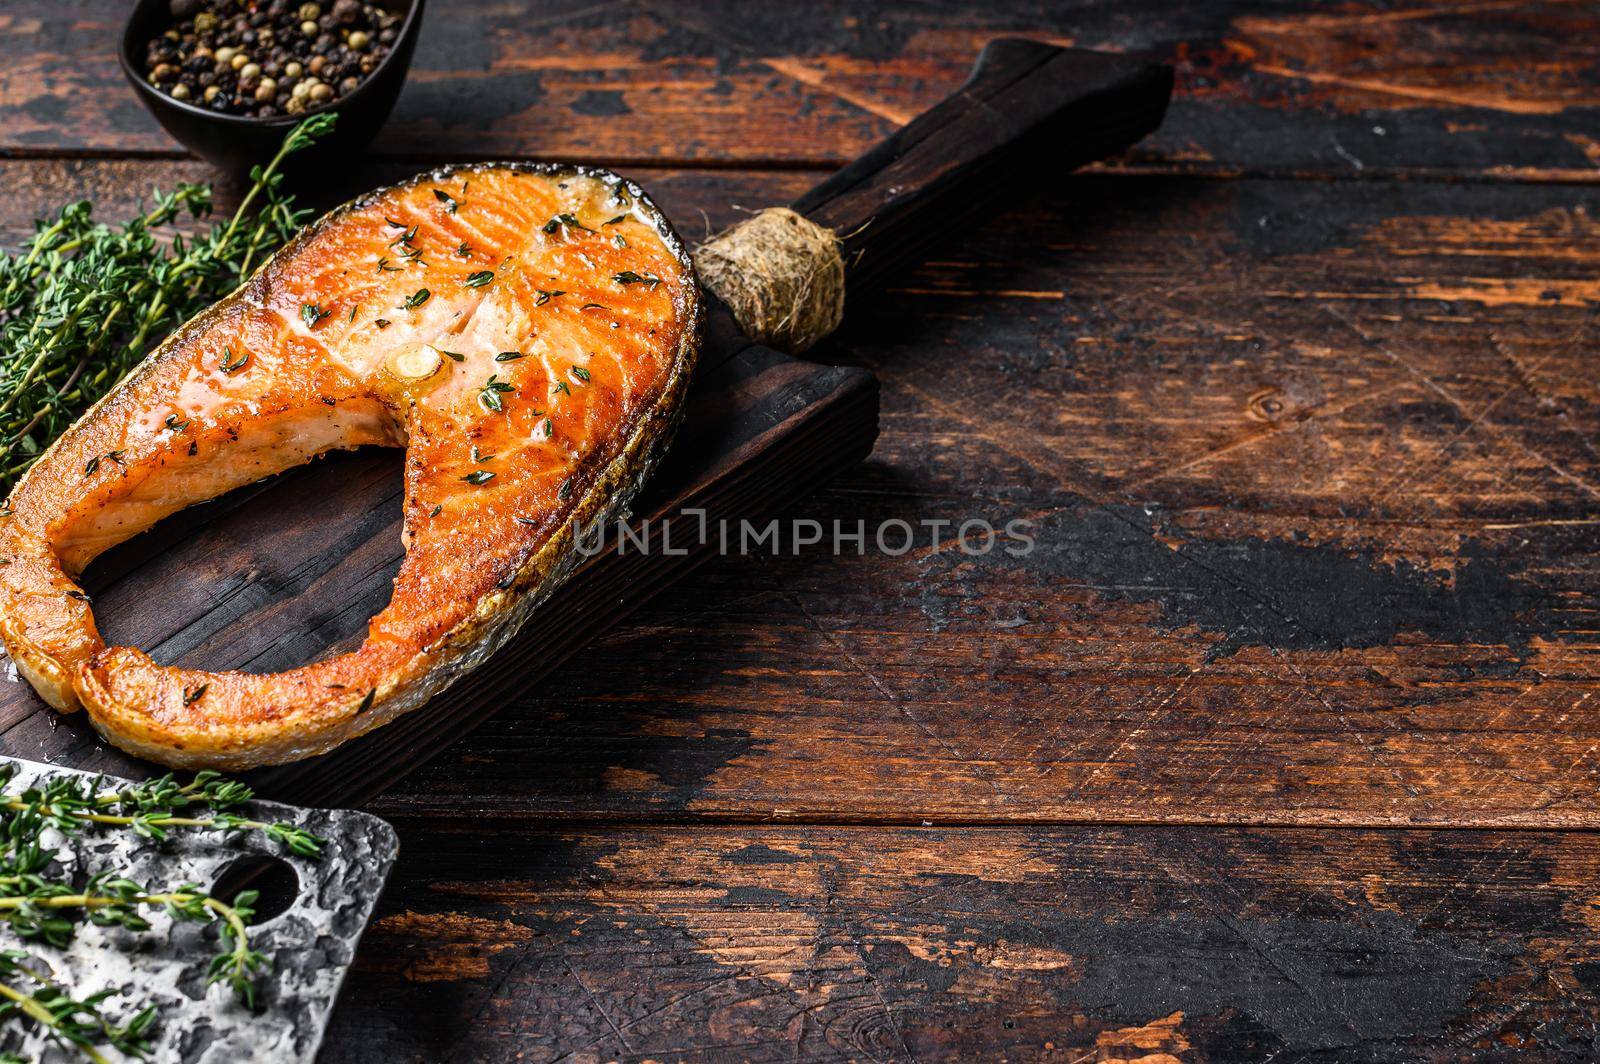 Fried trout fillet steak with pepper. Dark wooden background. Top view. Copy space.